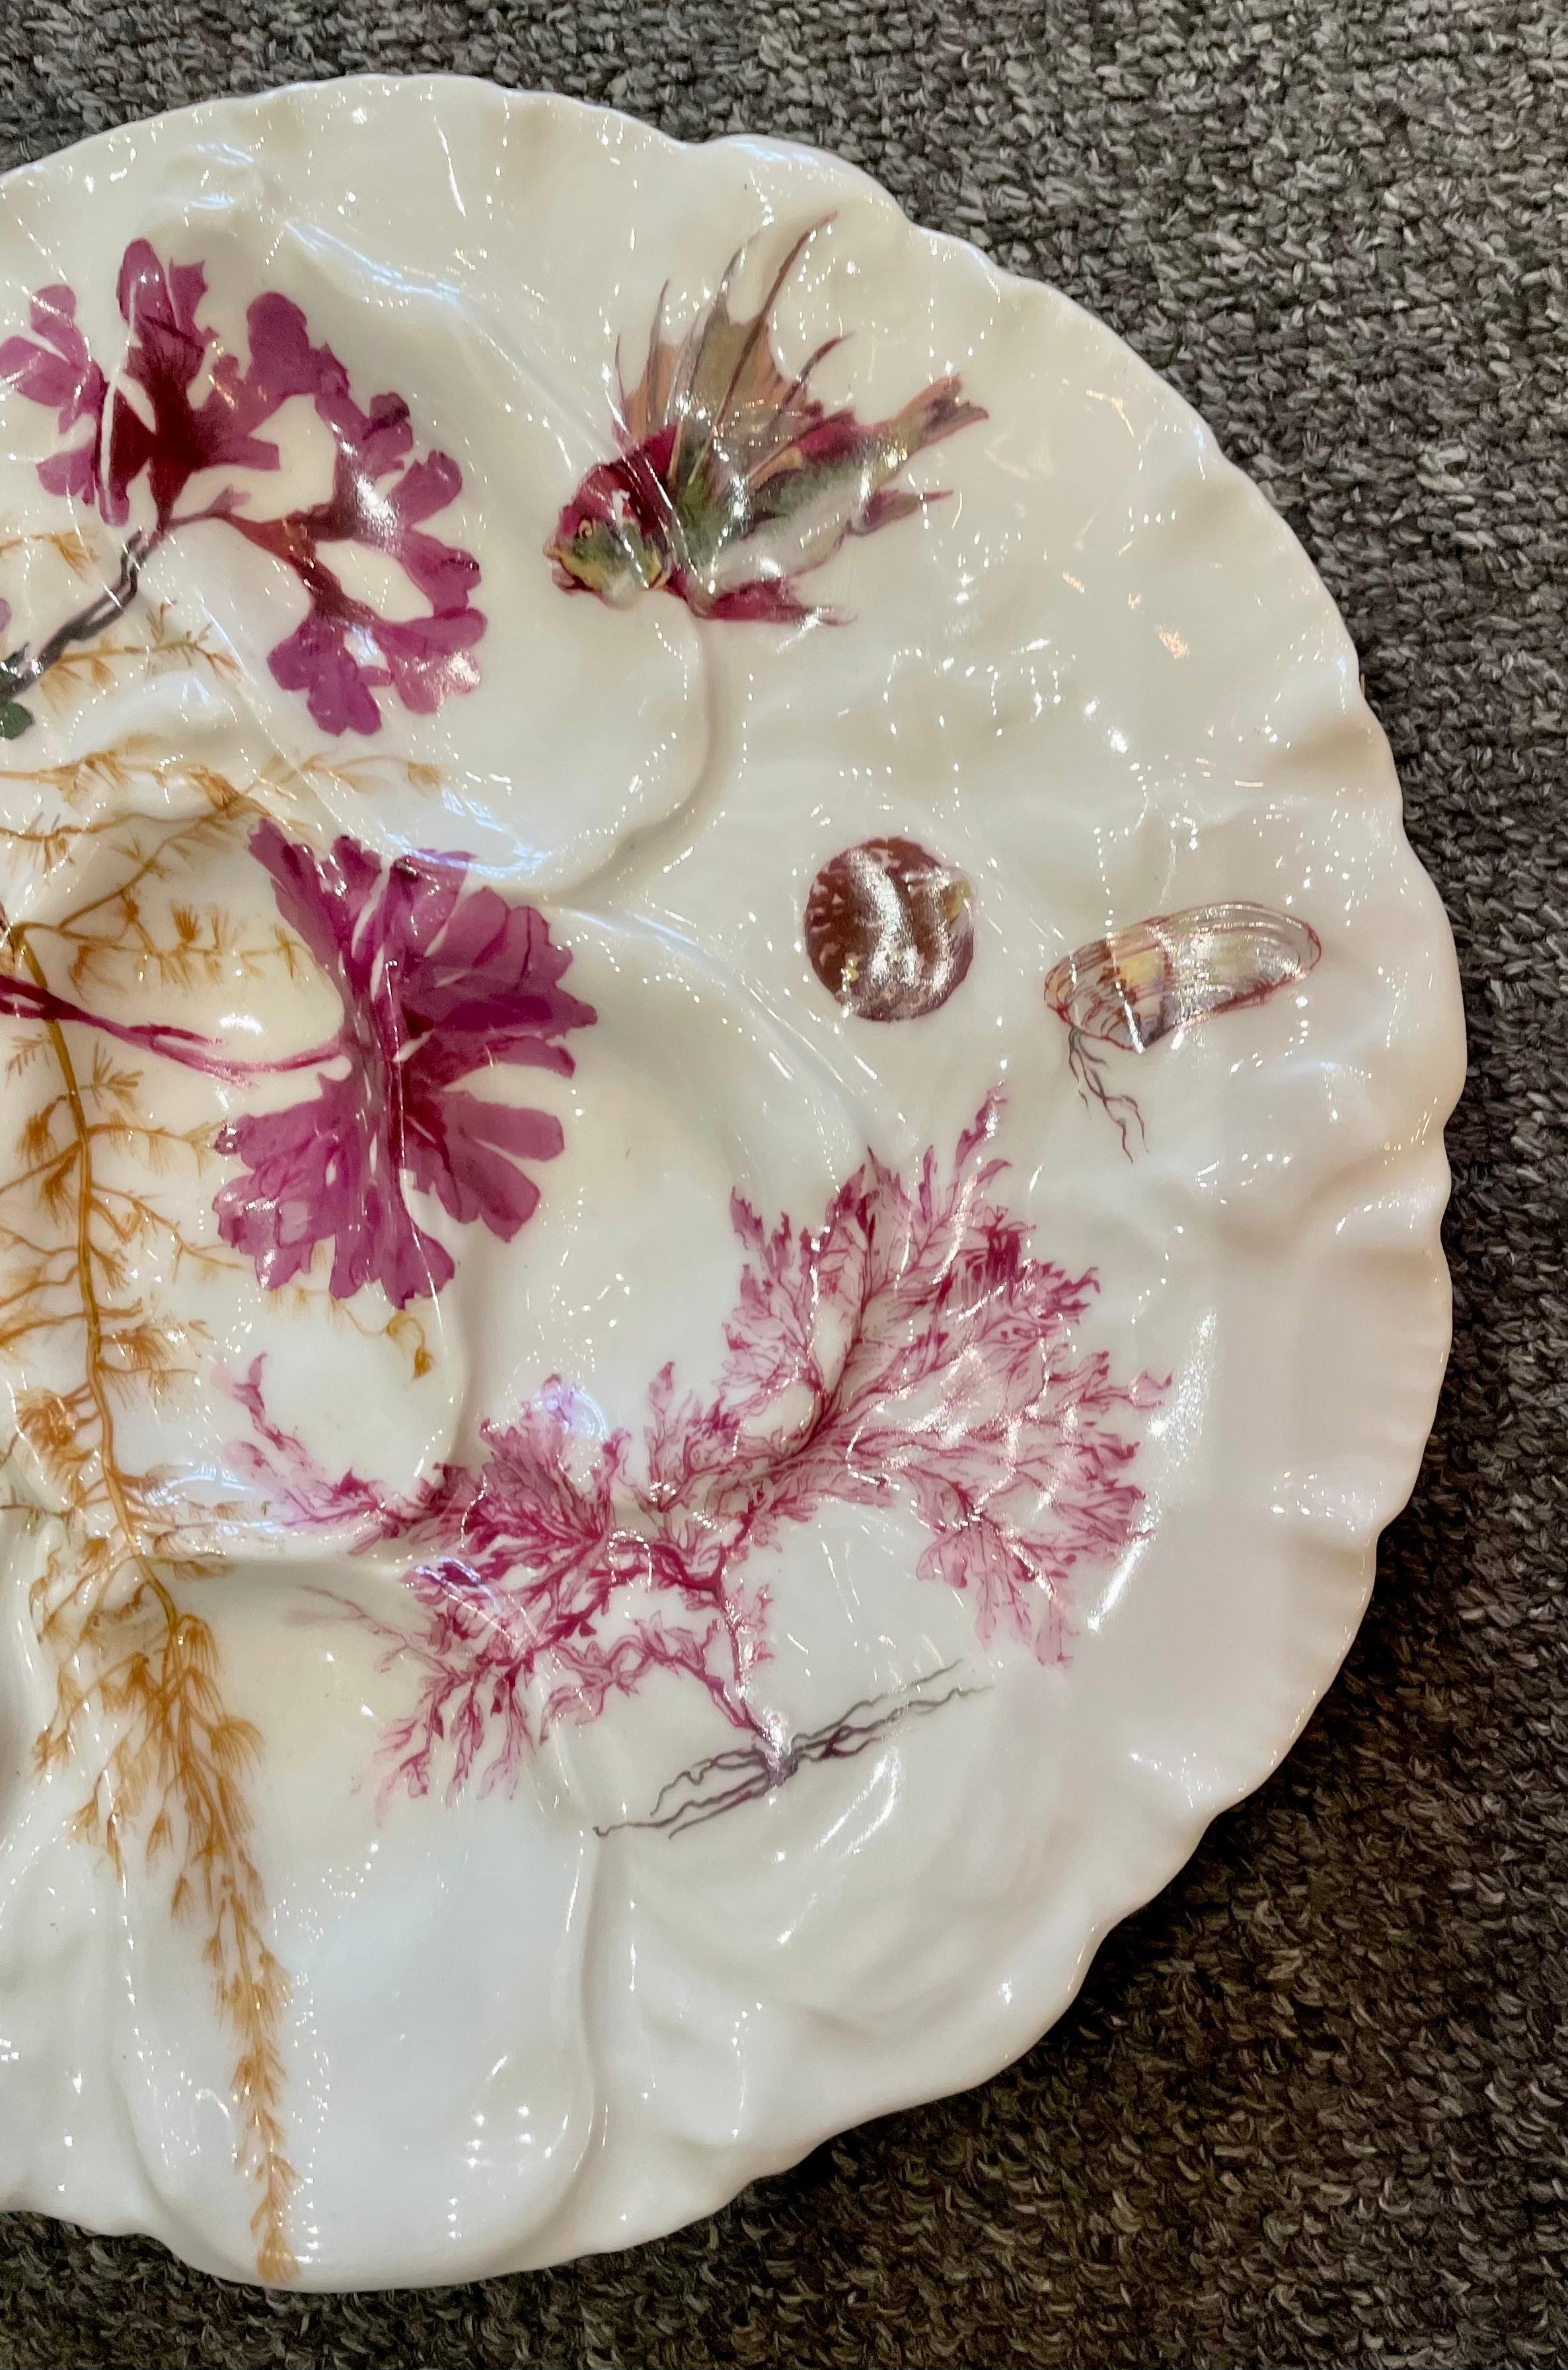 Antique French Limoges Porcelain turkey pattern oyster plate with hand-painted sea creatures, circa 1880-1890.
Beautiful hues of fuchsia, purple, and deep sea-green.